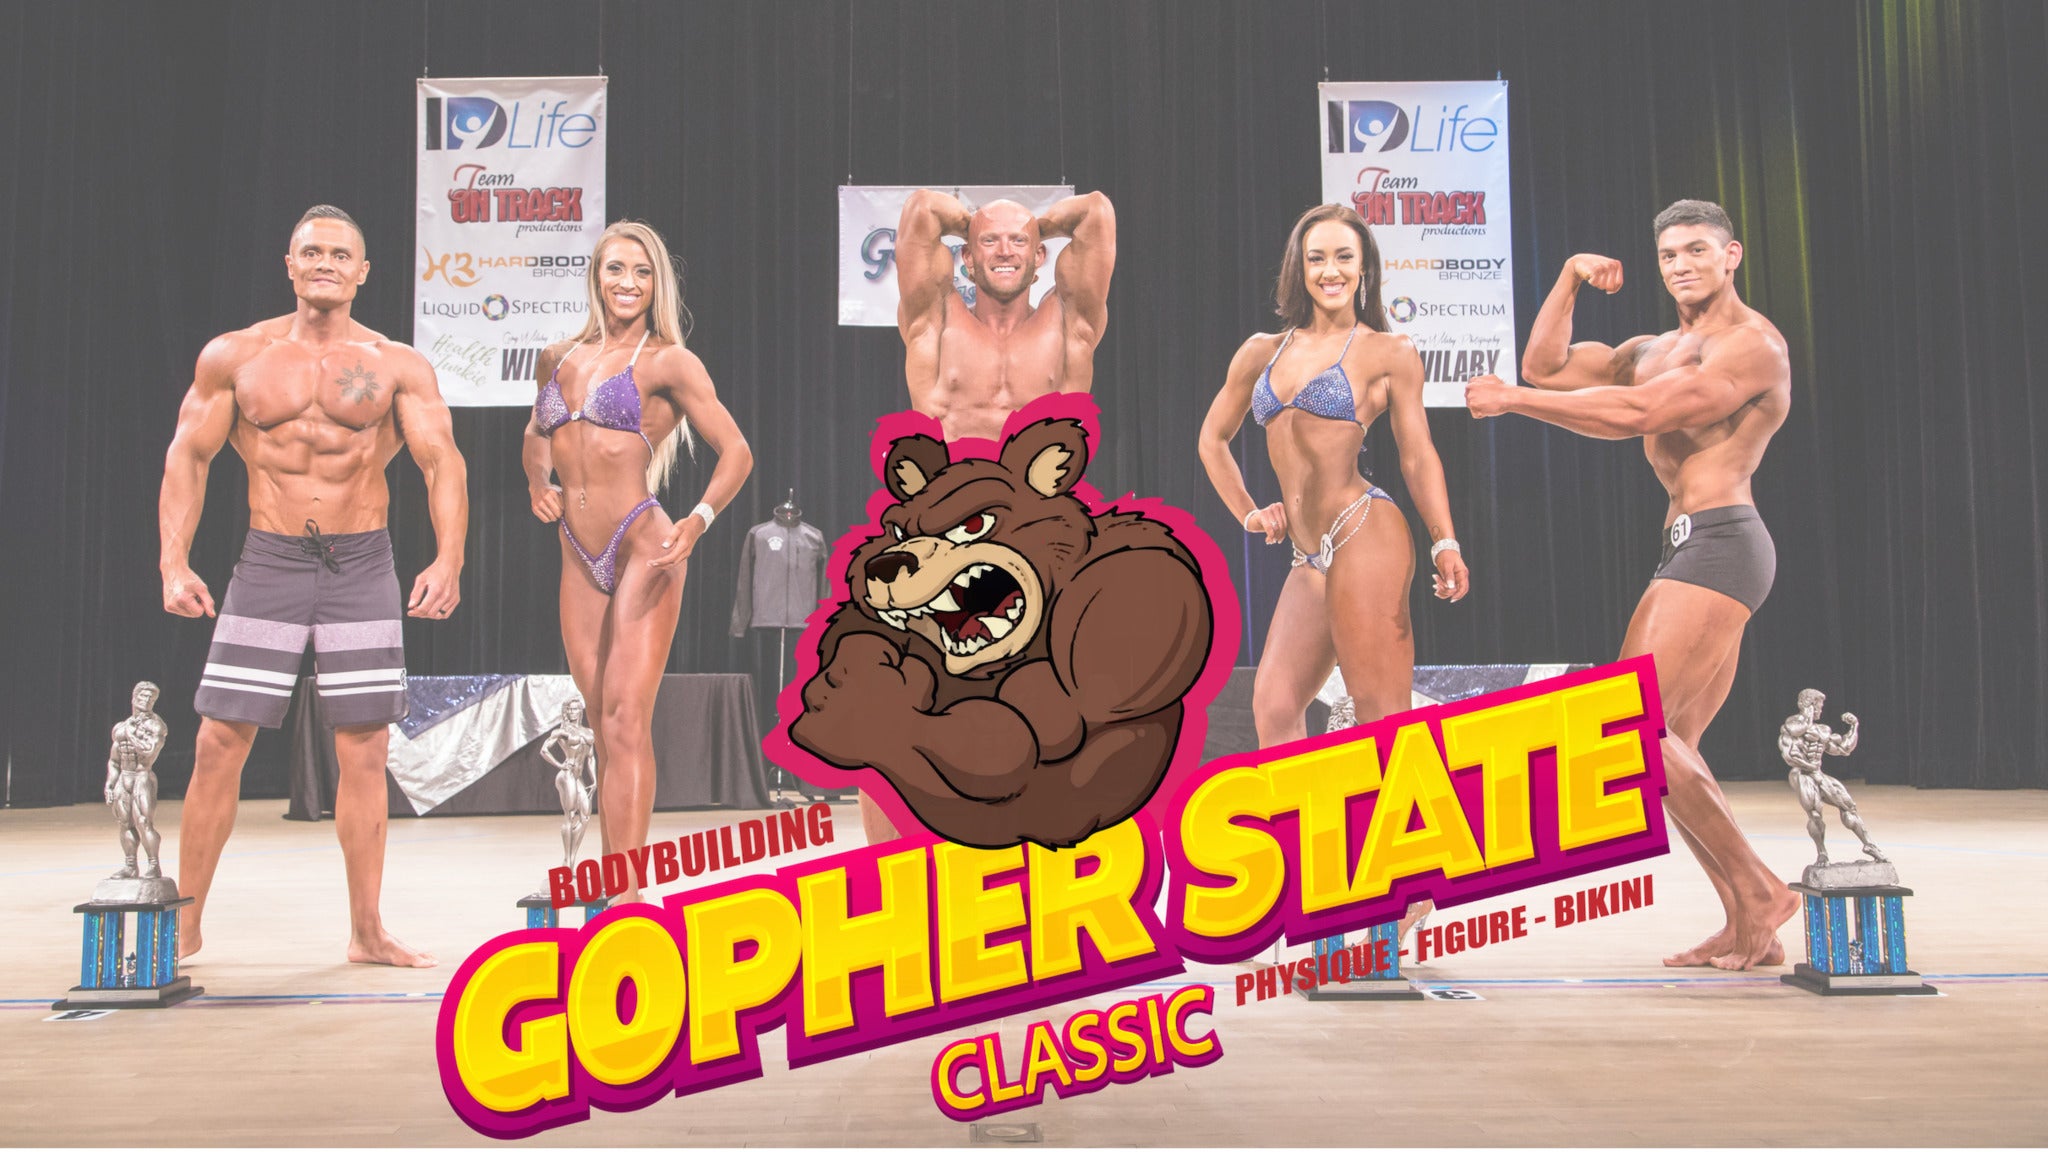 NPC Gopher State Classic Tickets Single Game Tickets & Schedule